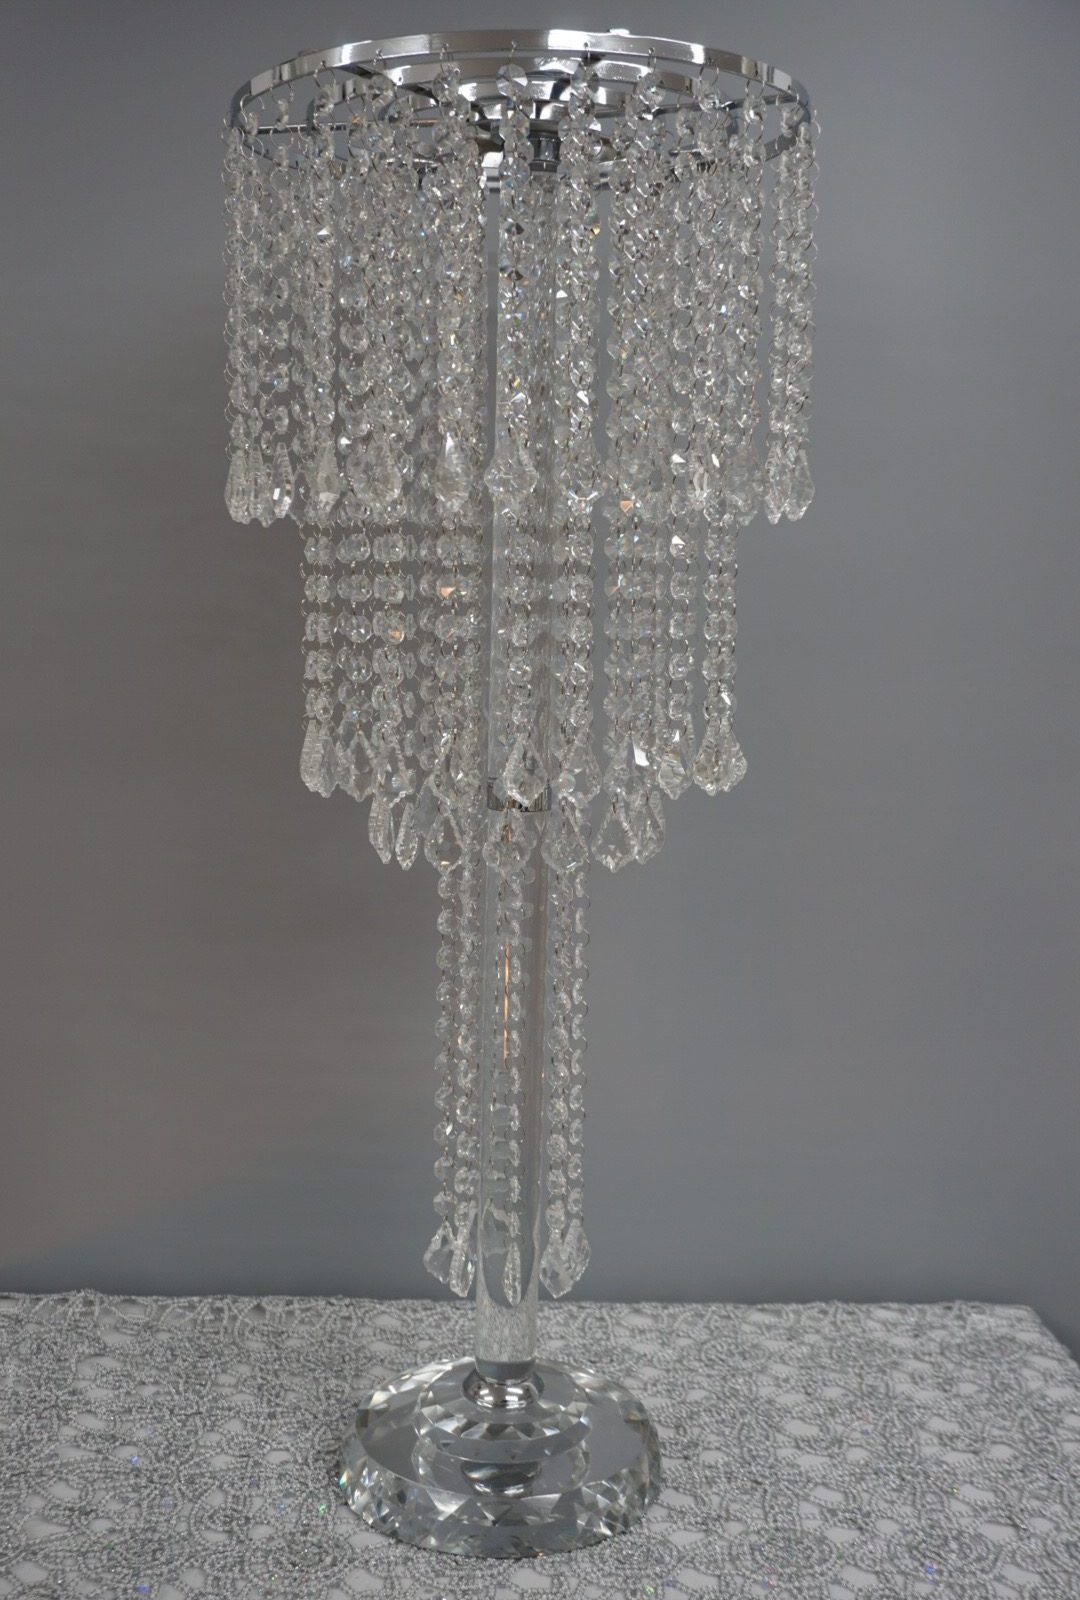 Crystal Table Chandelier